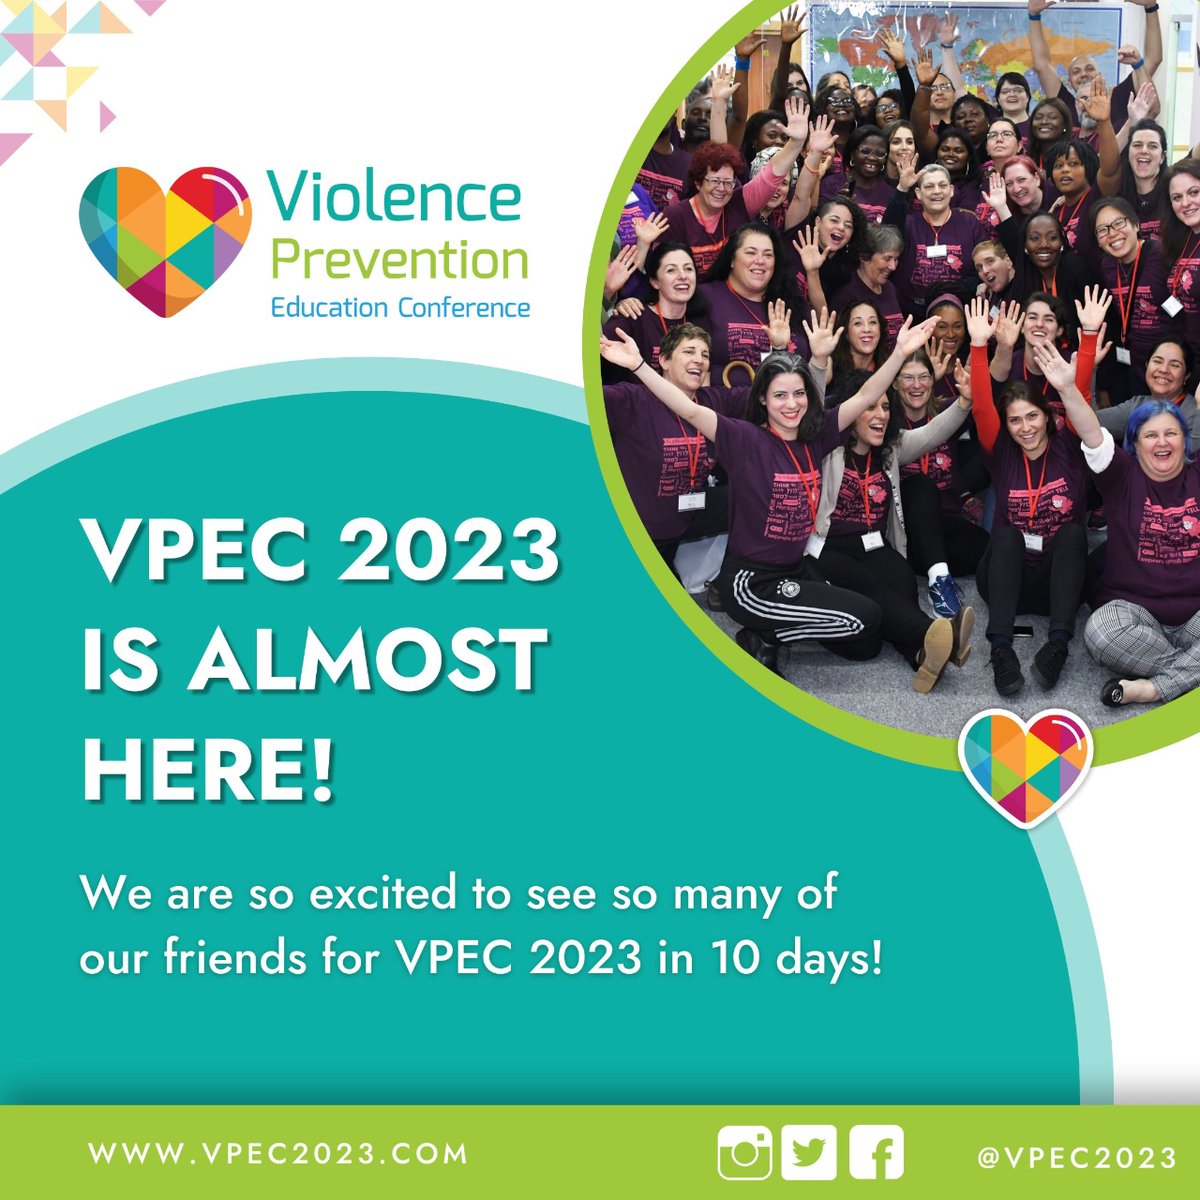 We are so excited to see so many of our friends for VPEC 2023 in 10 days!
Be sure to create your Whova account to take full advantage of the community platform before the event. Check out our helpful walkthrough for a step-by-step guide!
youtube.com/watch?v=g7vJch…
#VPEC23 #PowerofWe